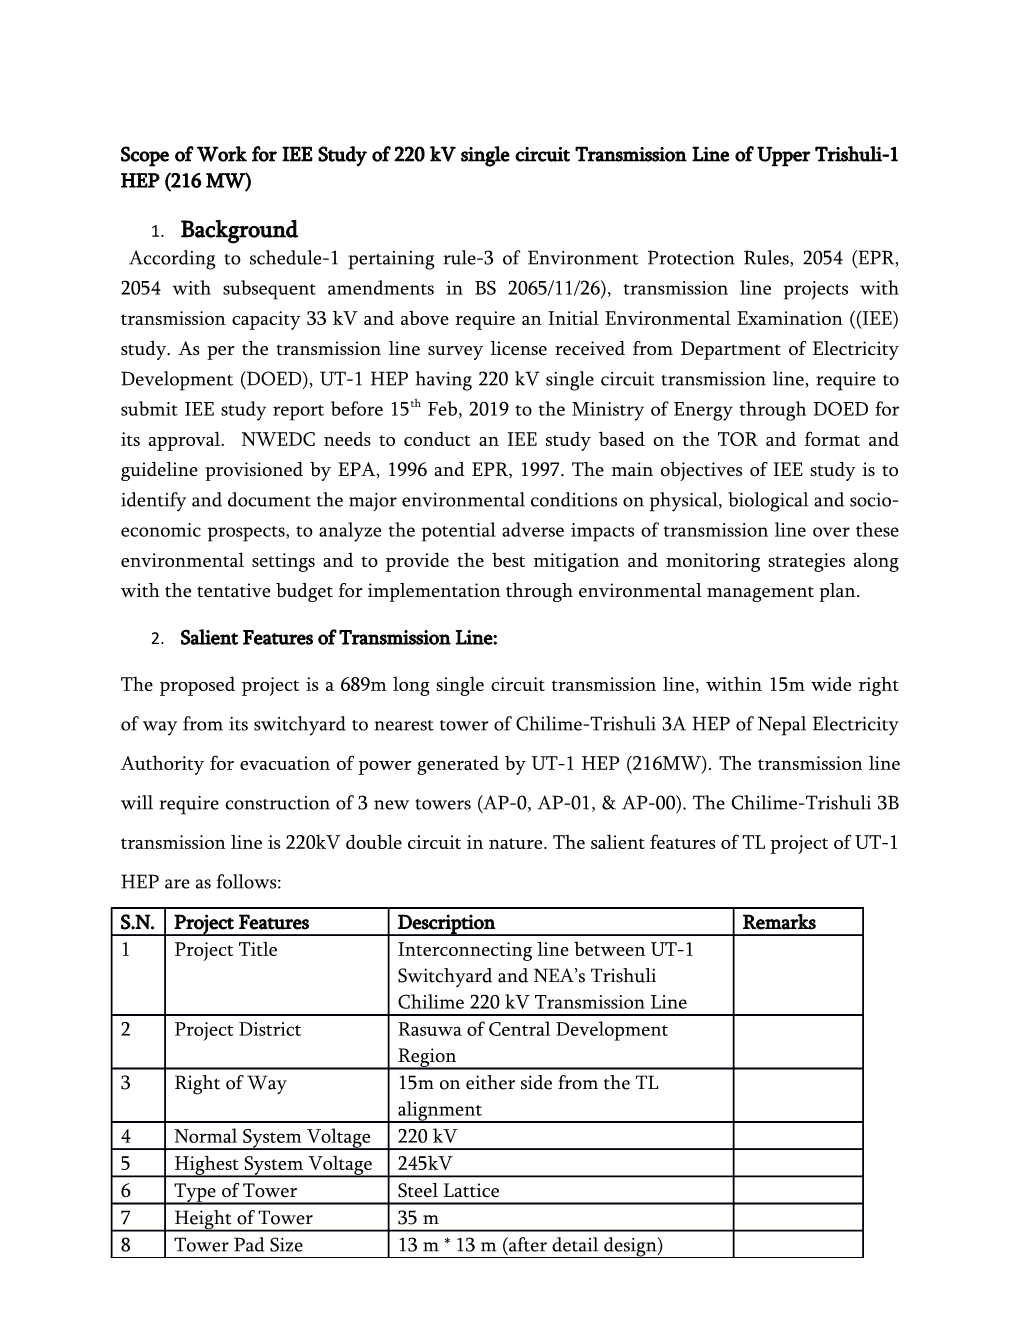 Scope of Work for IEE Study of 220 Kv Single Circuit Transmission Line of Upper Trishuli-1